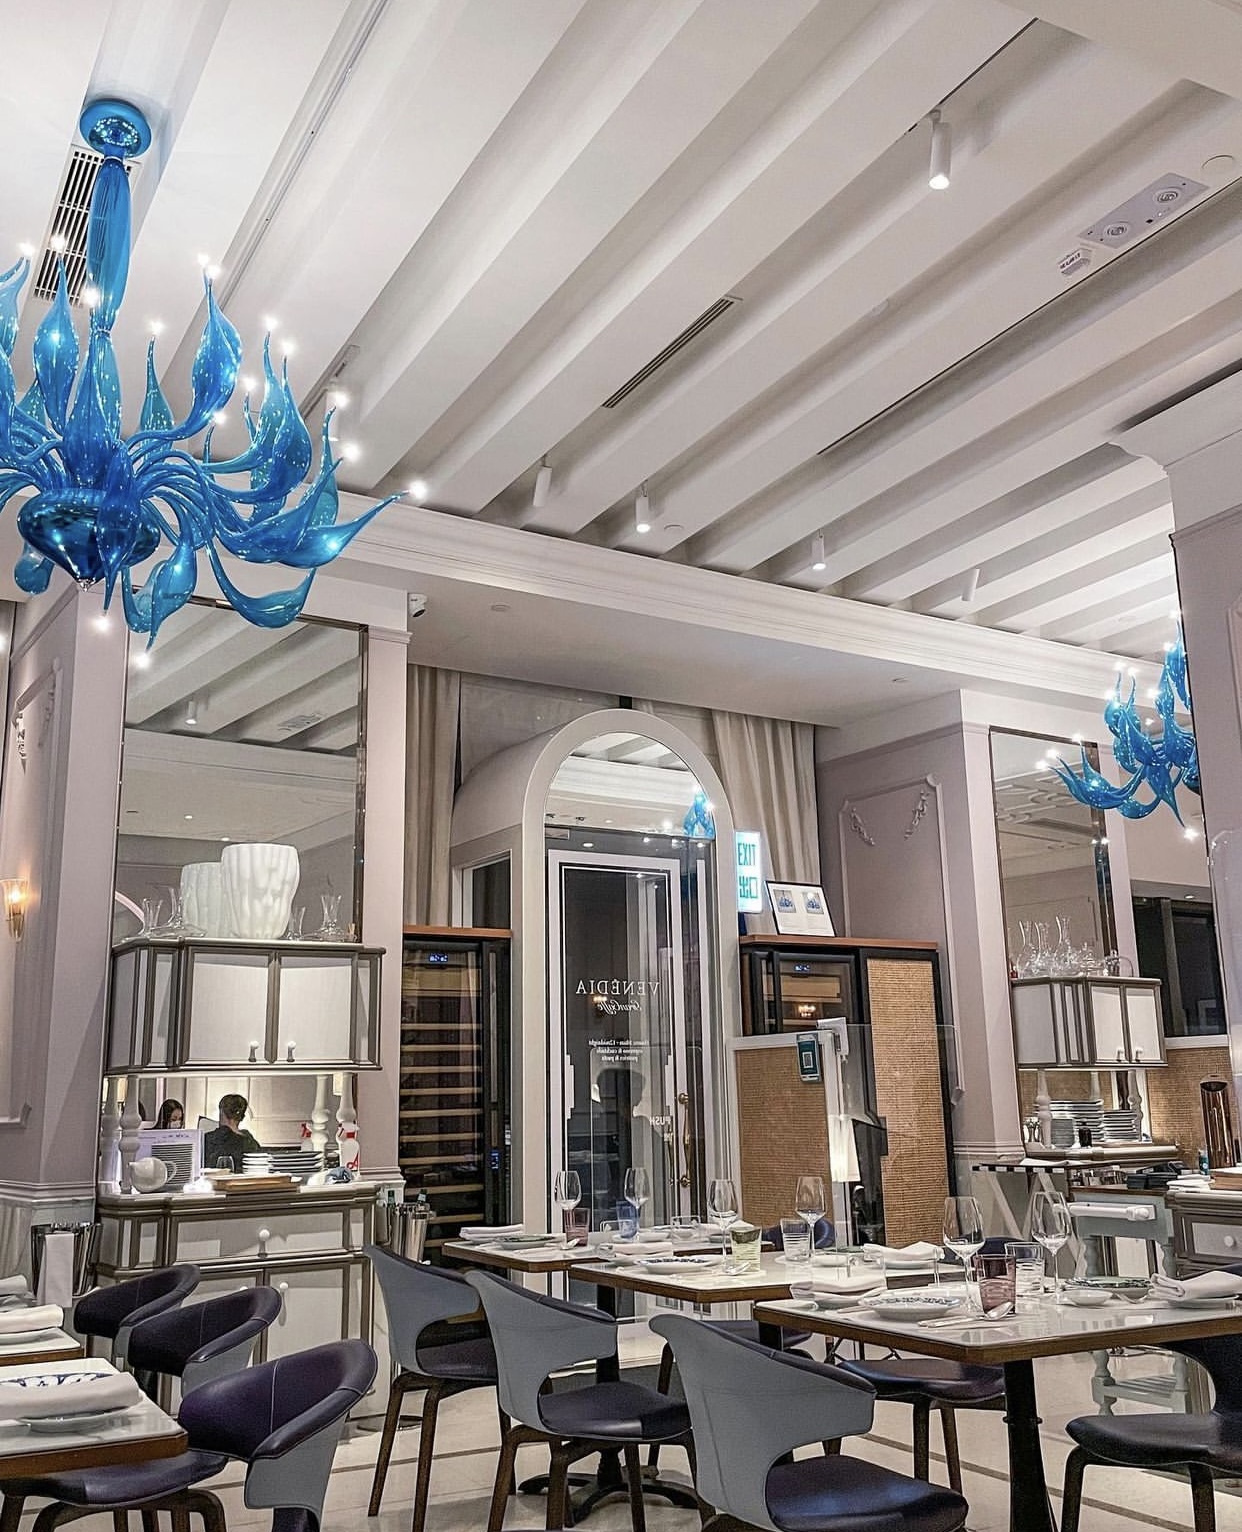 Chandeliers in turquoise blown glass